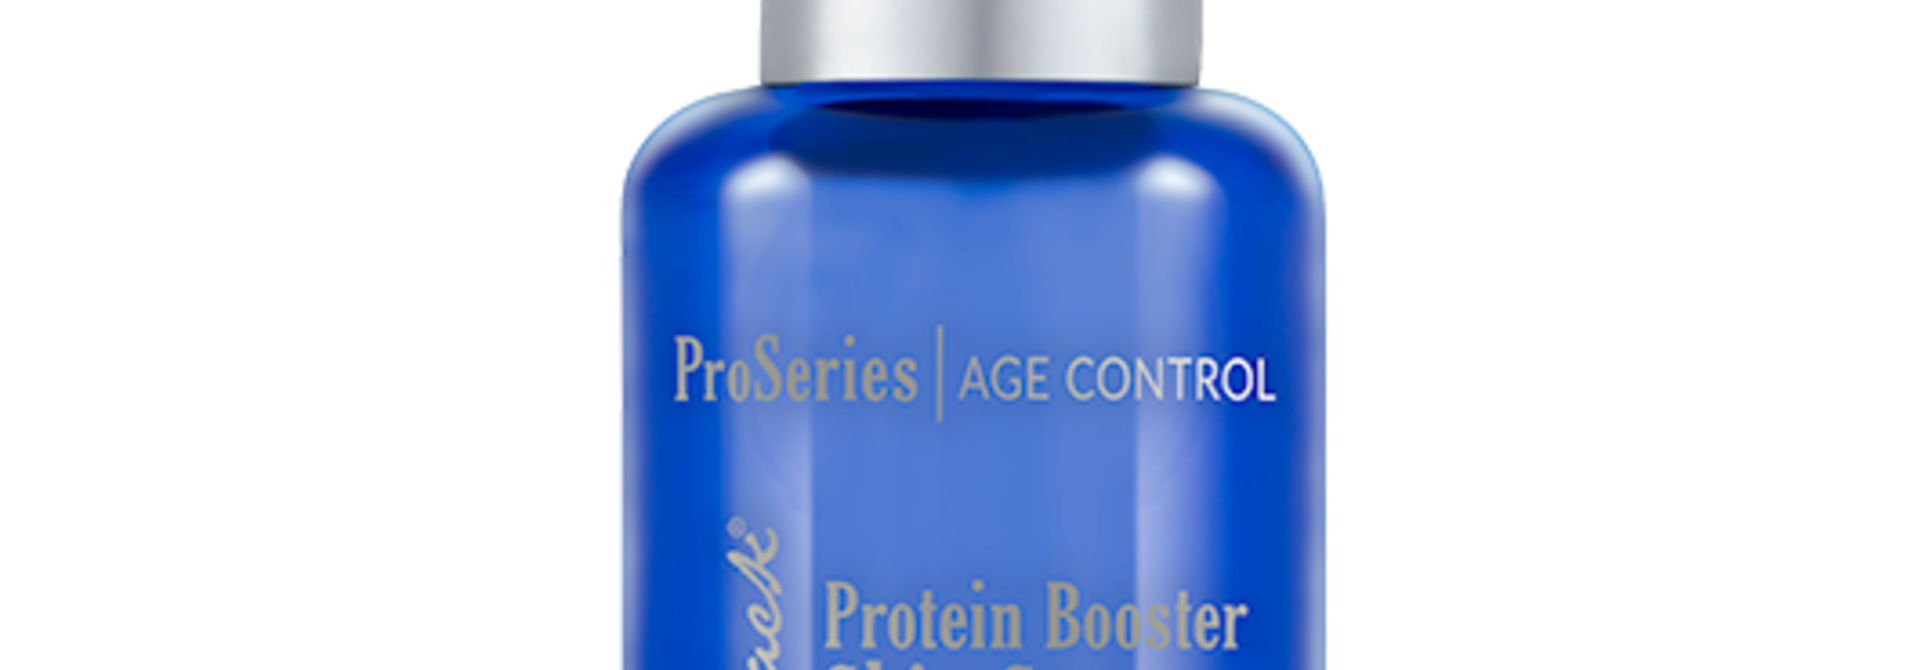 Protein Booster Skin Serum | The Skincare Collection